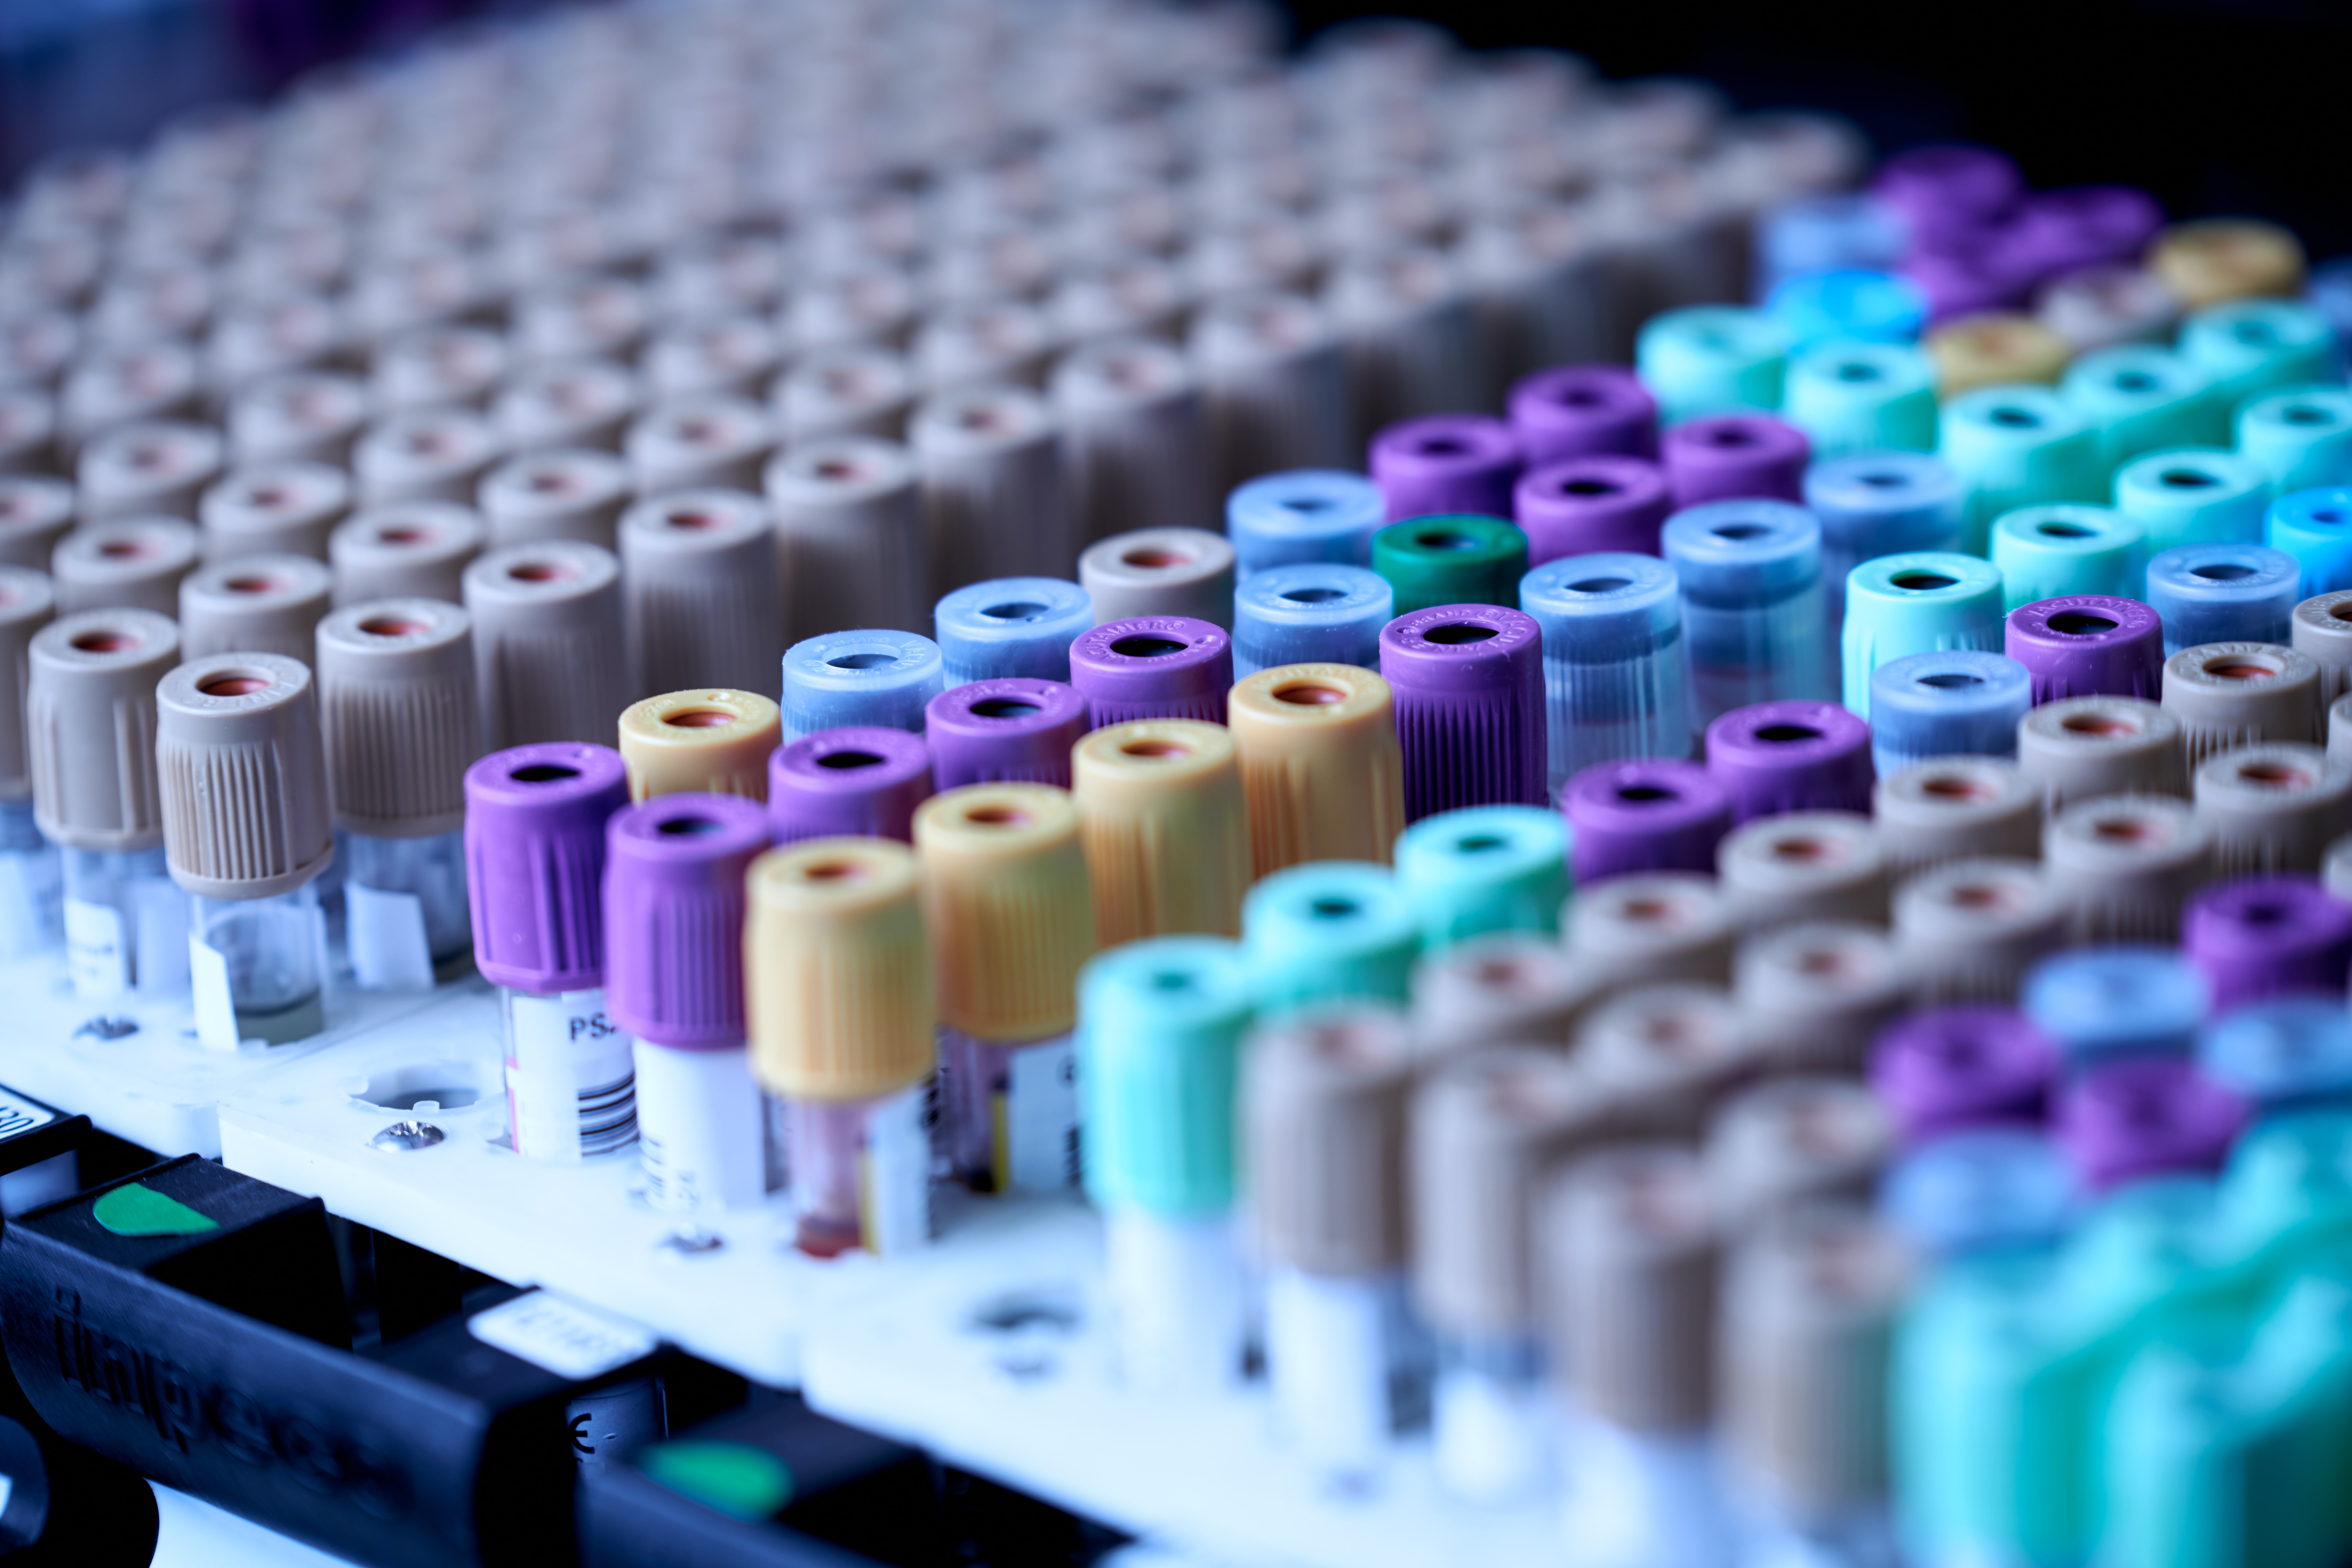 Image of various colored test tubes in a rack